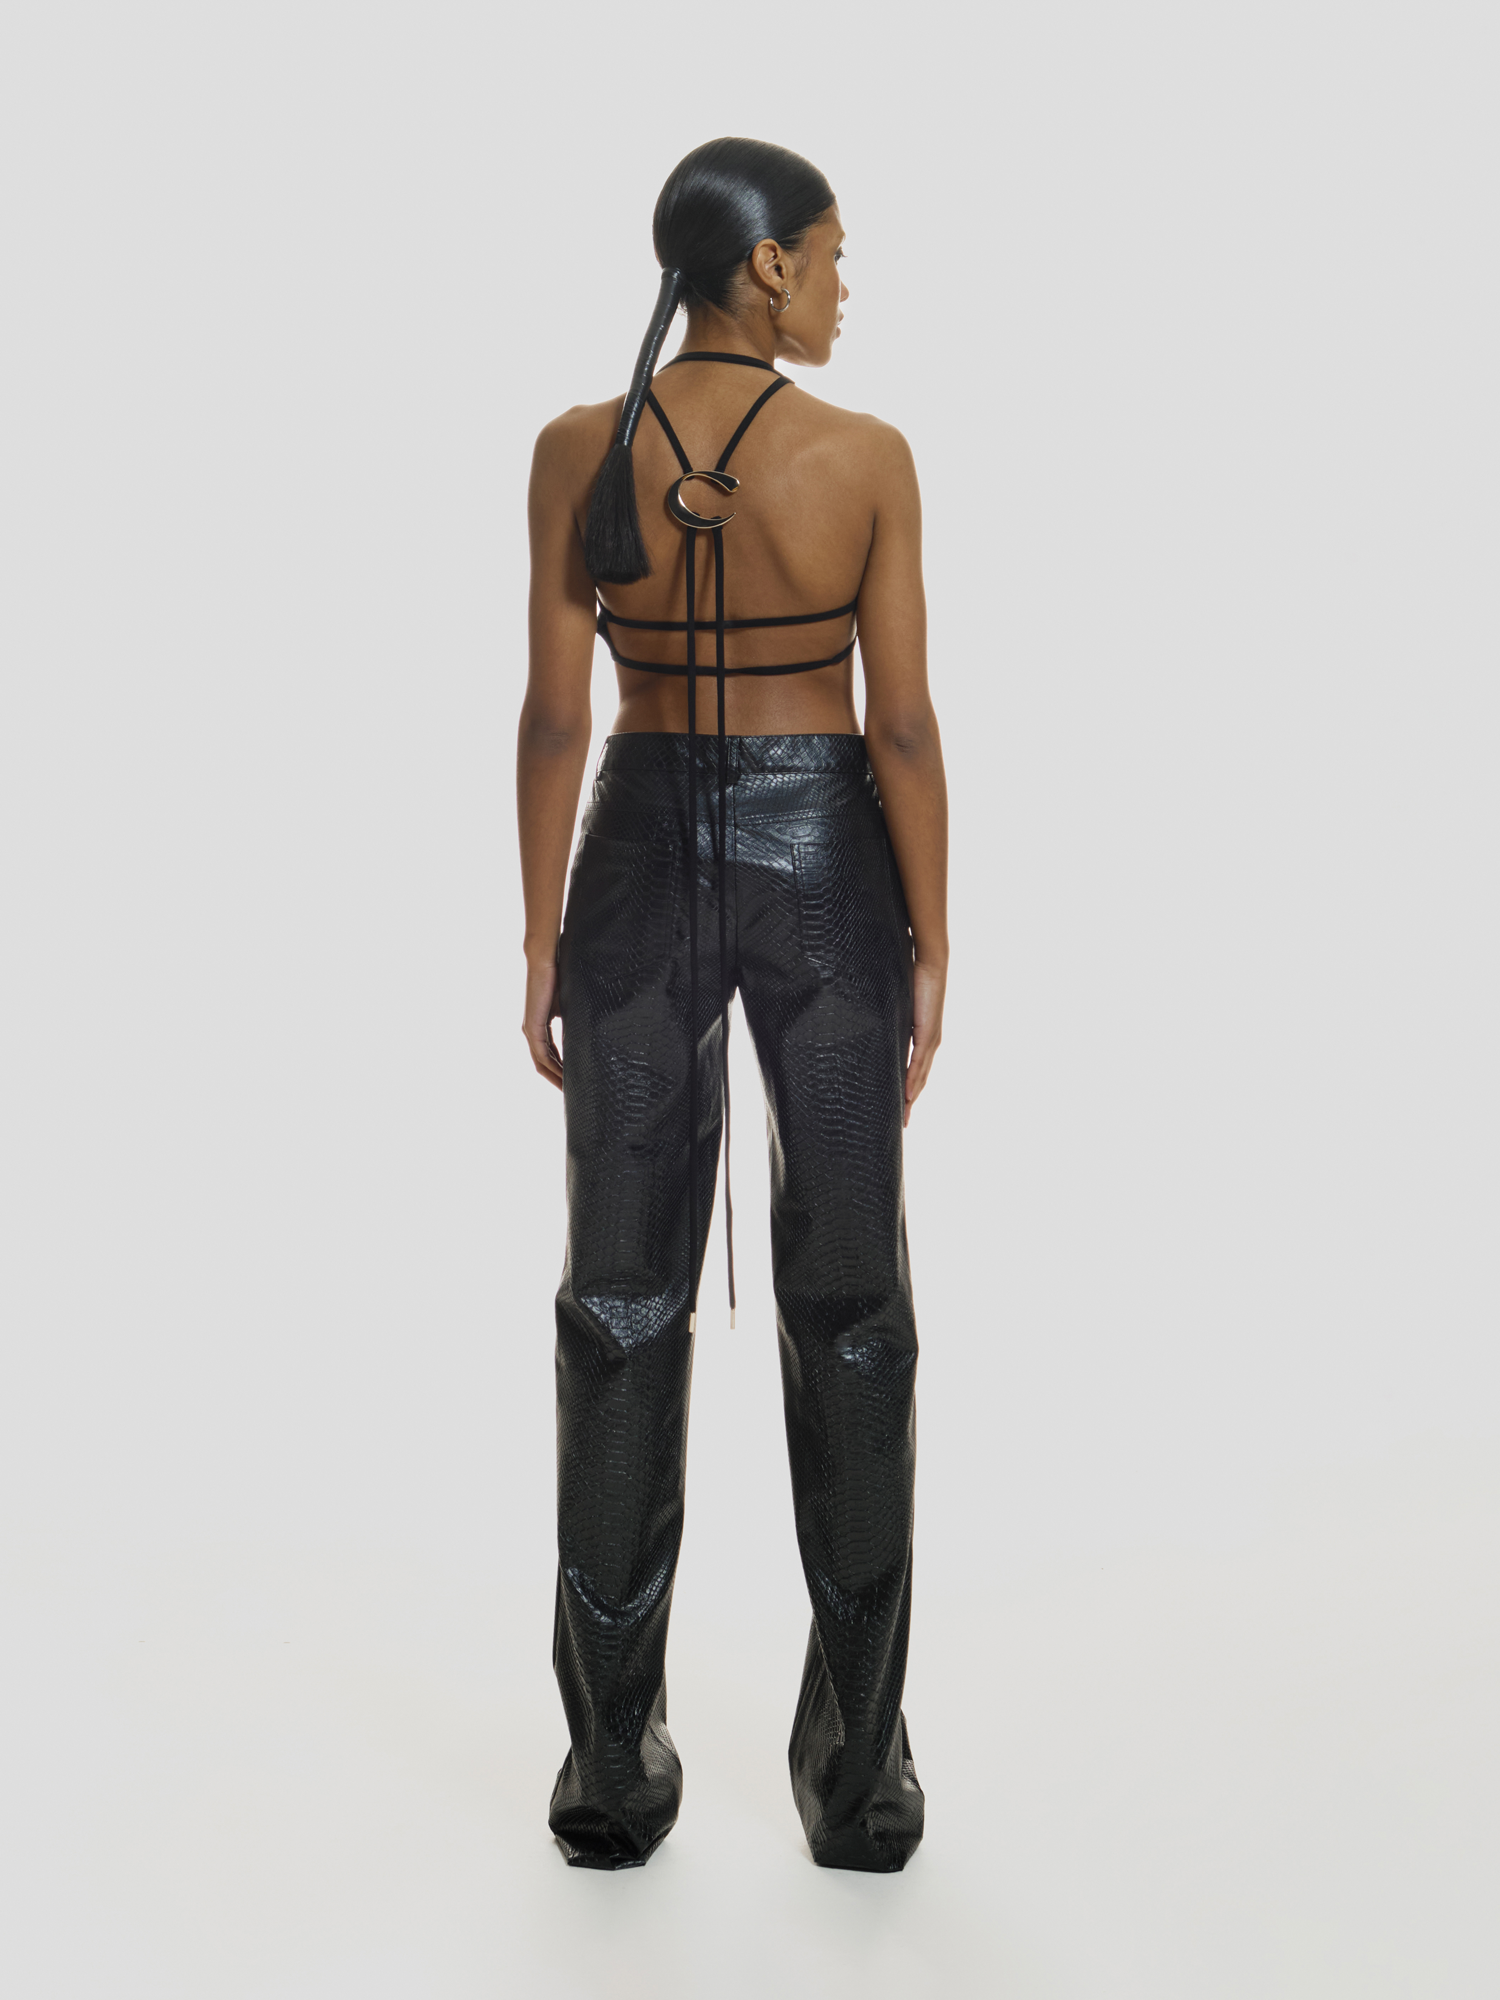 Full shot of a girl facing back in a black crop top with extended laces and black crocodile printed vegan leather pants with mid rise